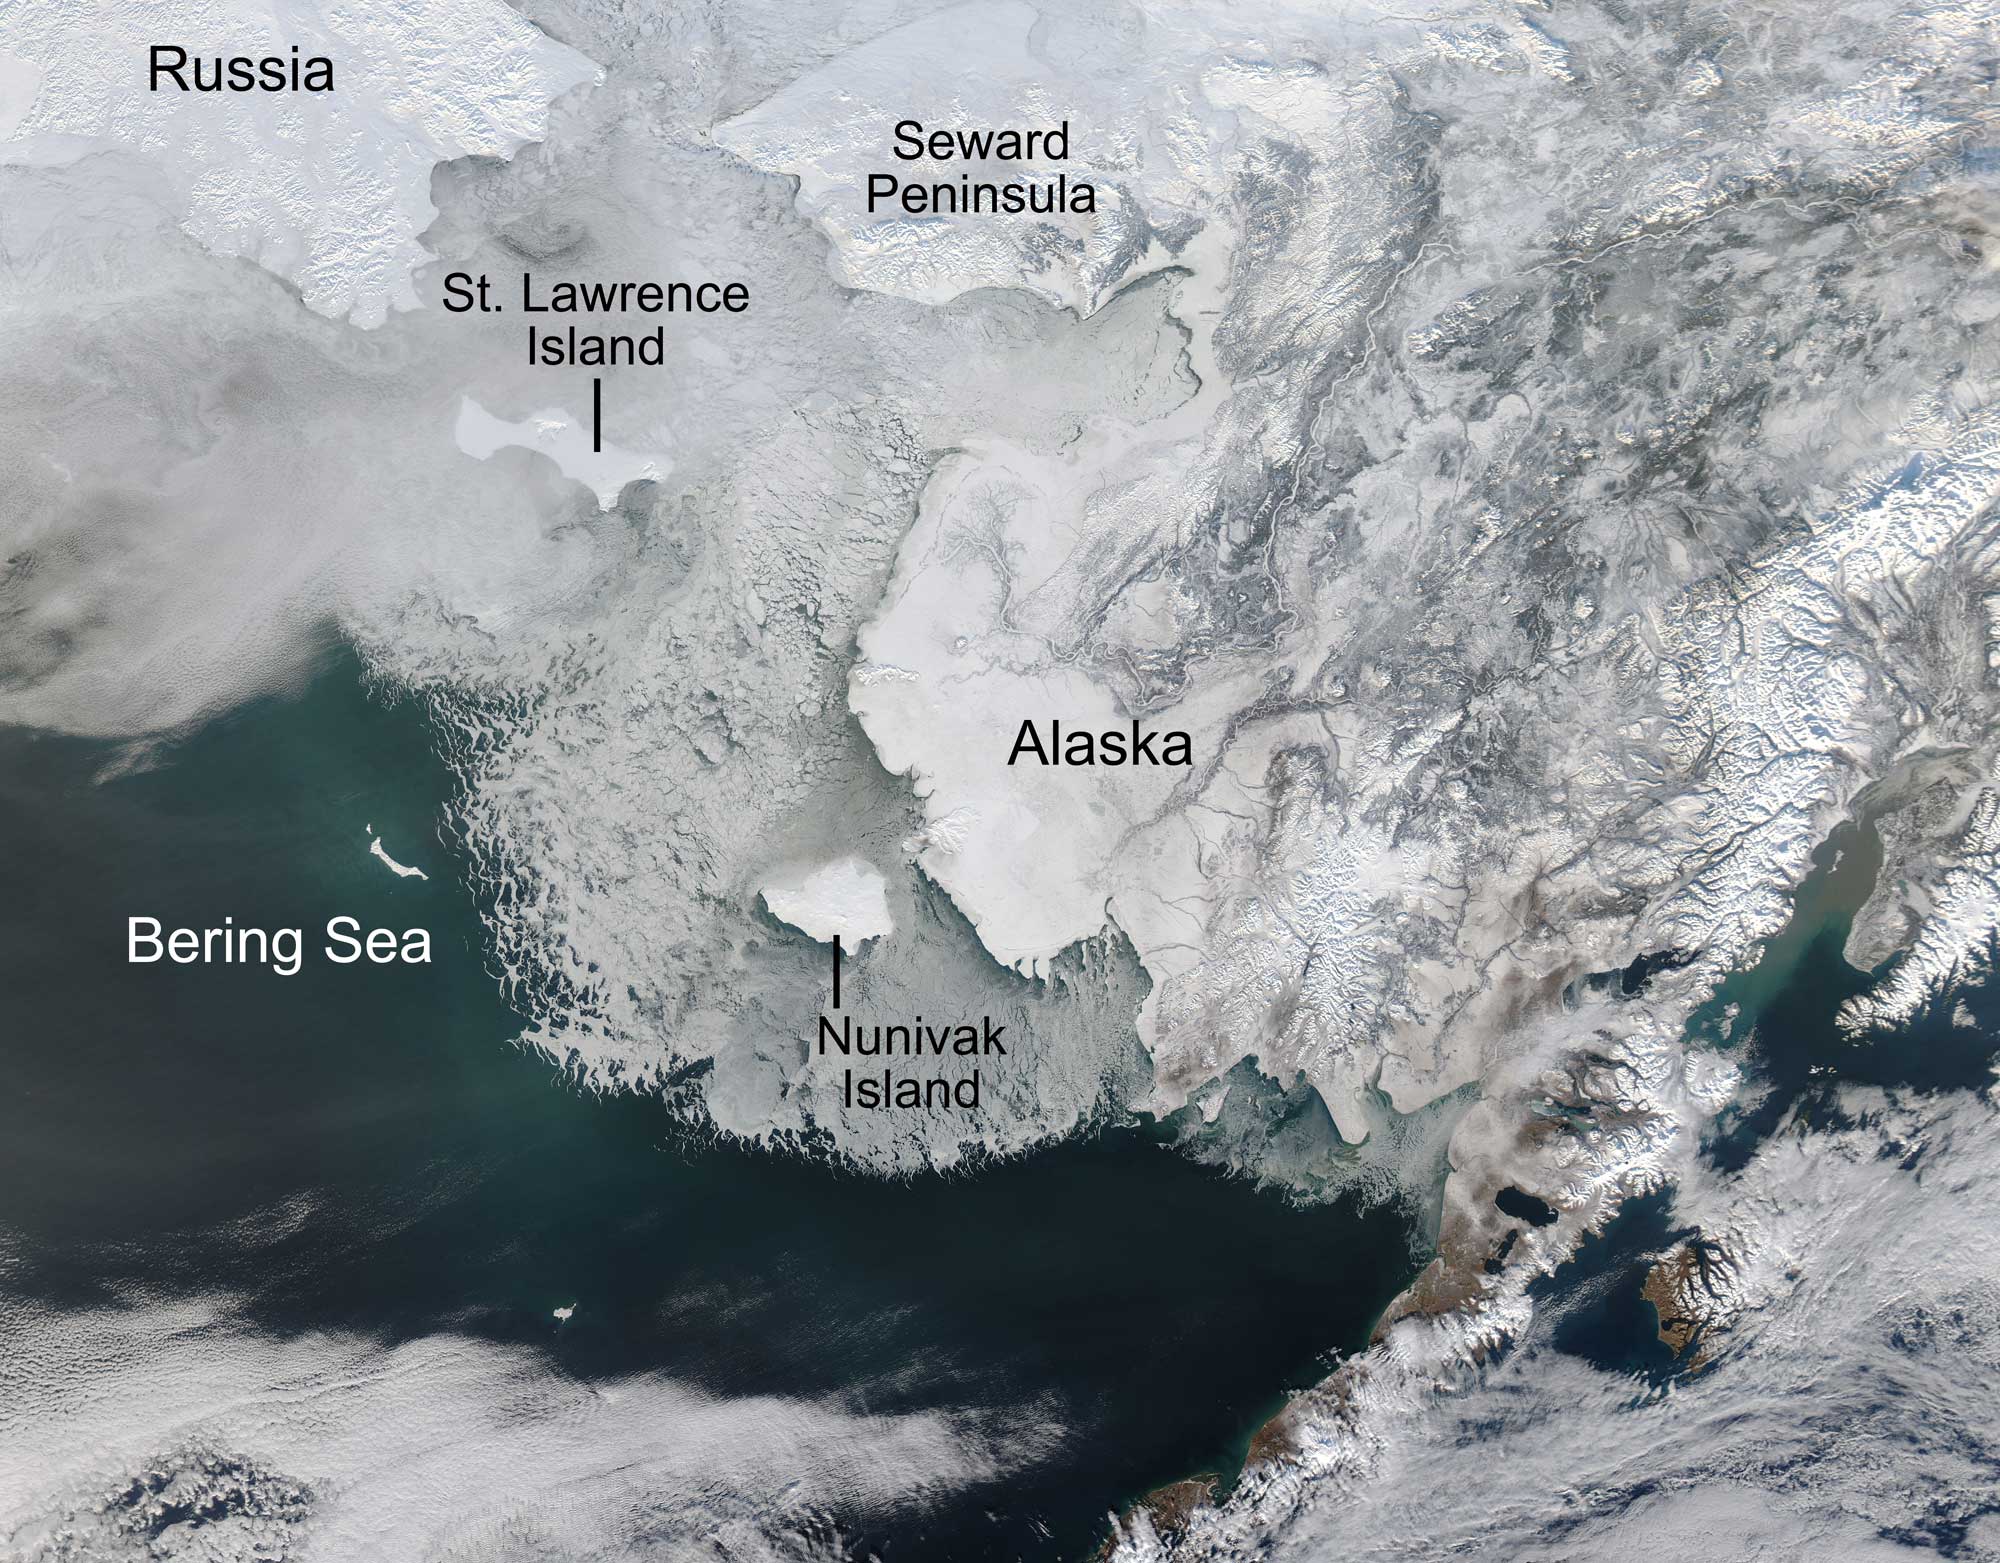 Satellite photo of the Bering Sea in February 2014. The photo shows the western part of Alaska and the eastern tip of Russia, both covered in snow. The sea between the landmasses is covered in ice to the north, with open water to the south.